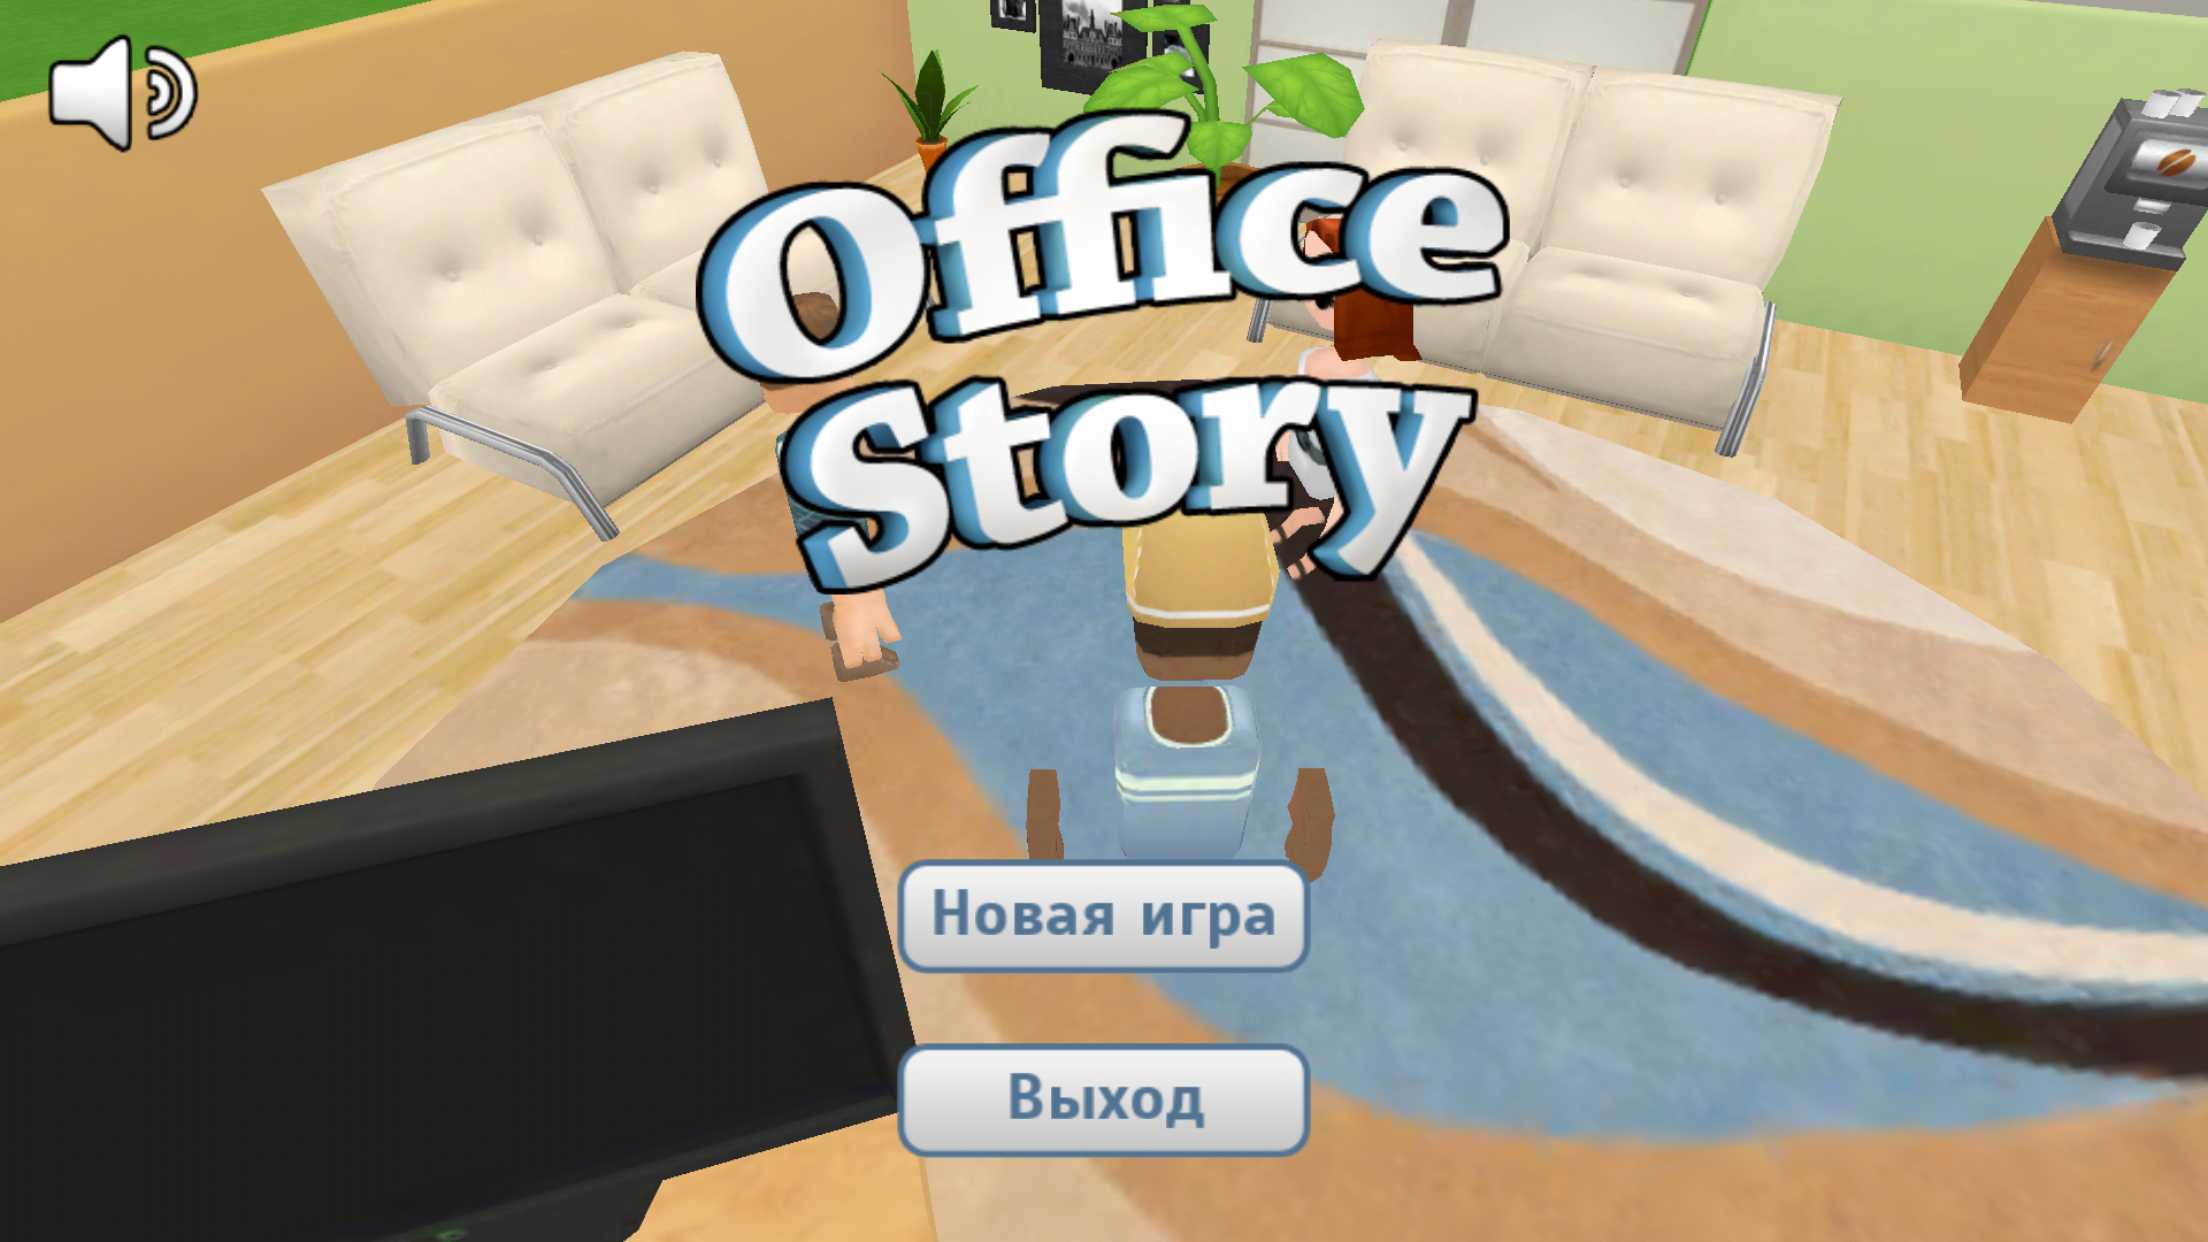 Игра Office story. Андроид Office story. Continue the story game. IOS Hack. Long story game